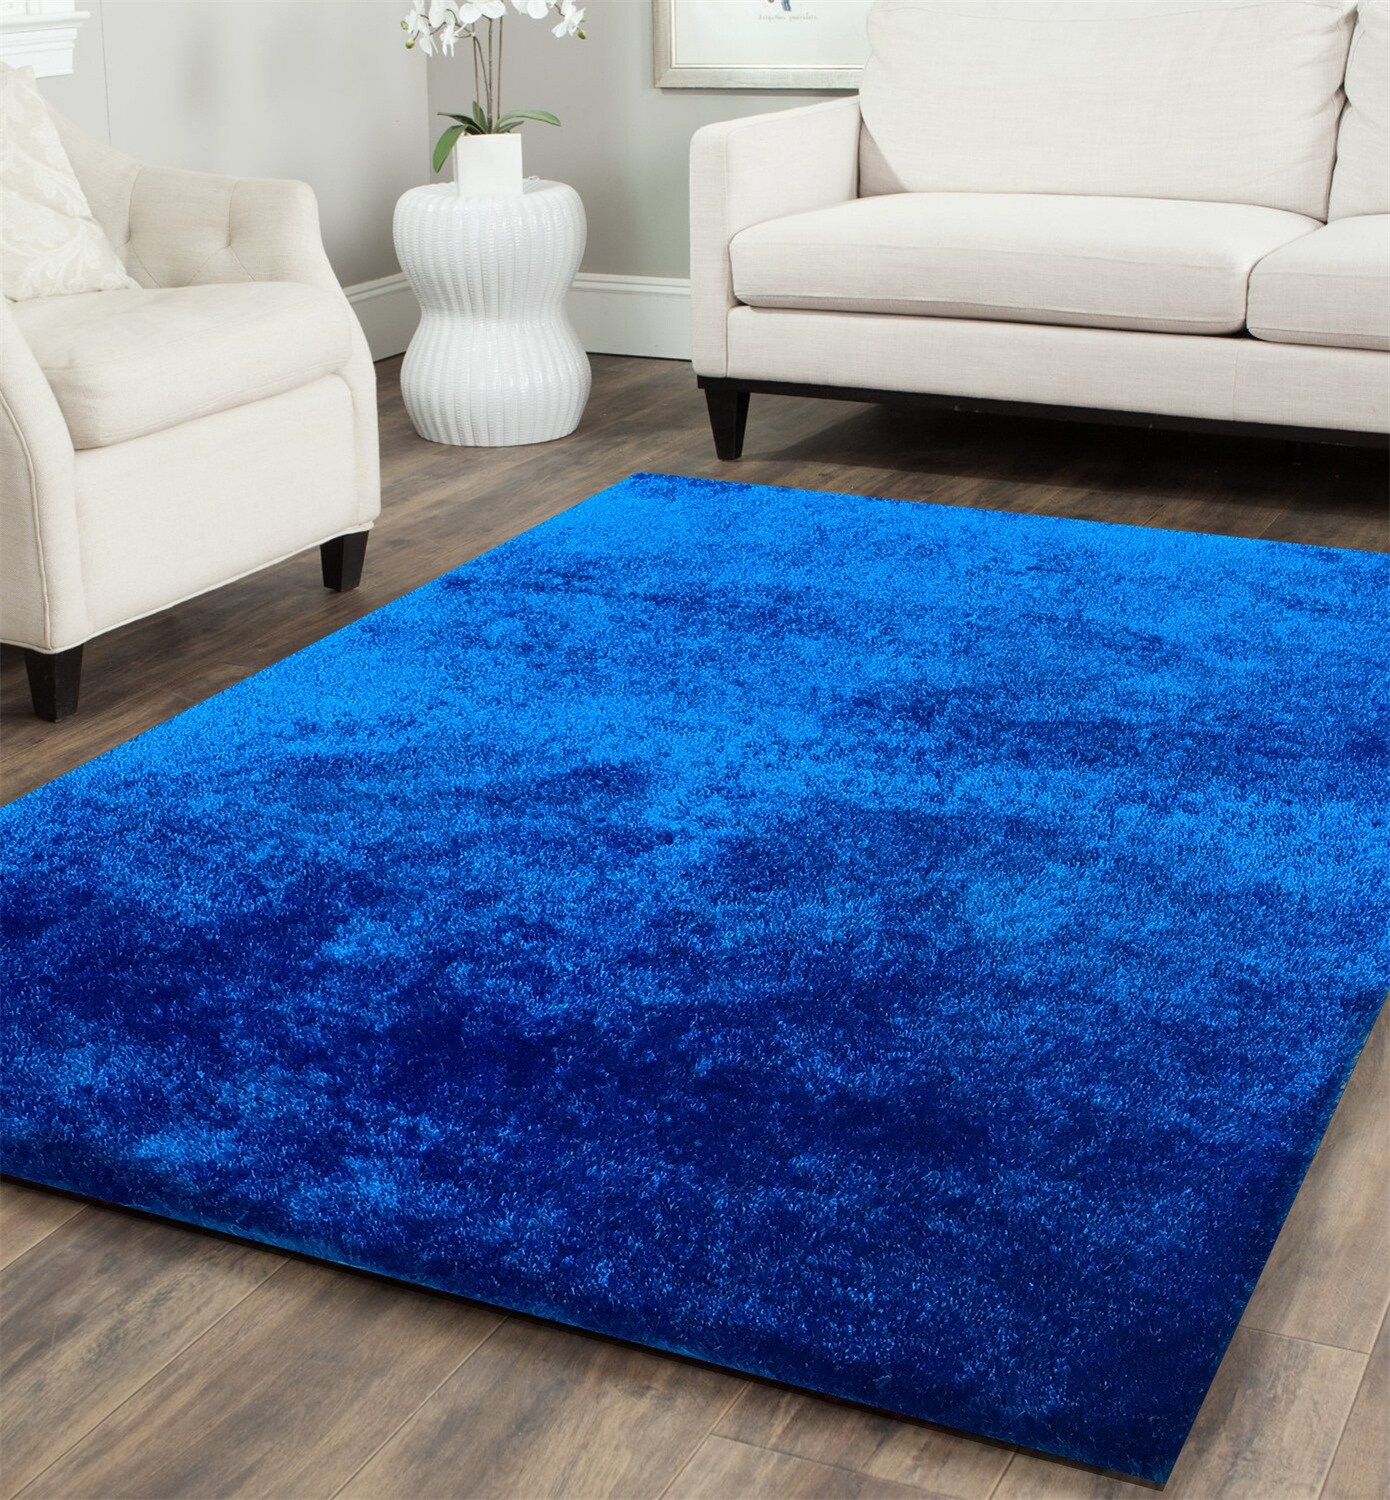  Navy Blue Carpet for Living Room Soft Luxury Bedroom Large  Fluffy Plush Area Rug Shaggy Big Comfy Carpet (2X3 Feet, Navy Blue/White):  Home & Kitchen